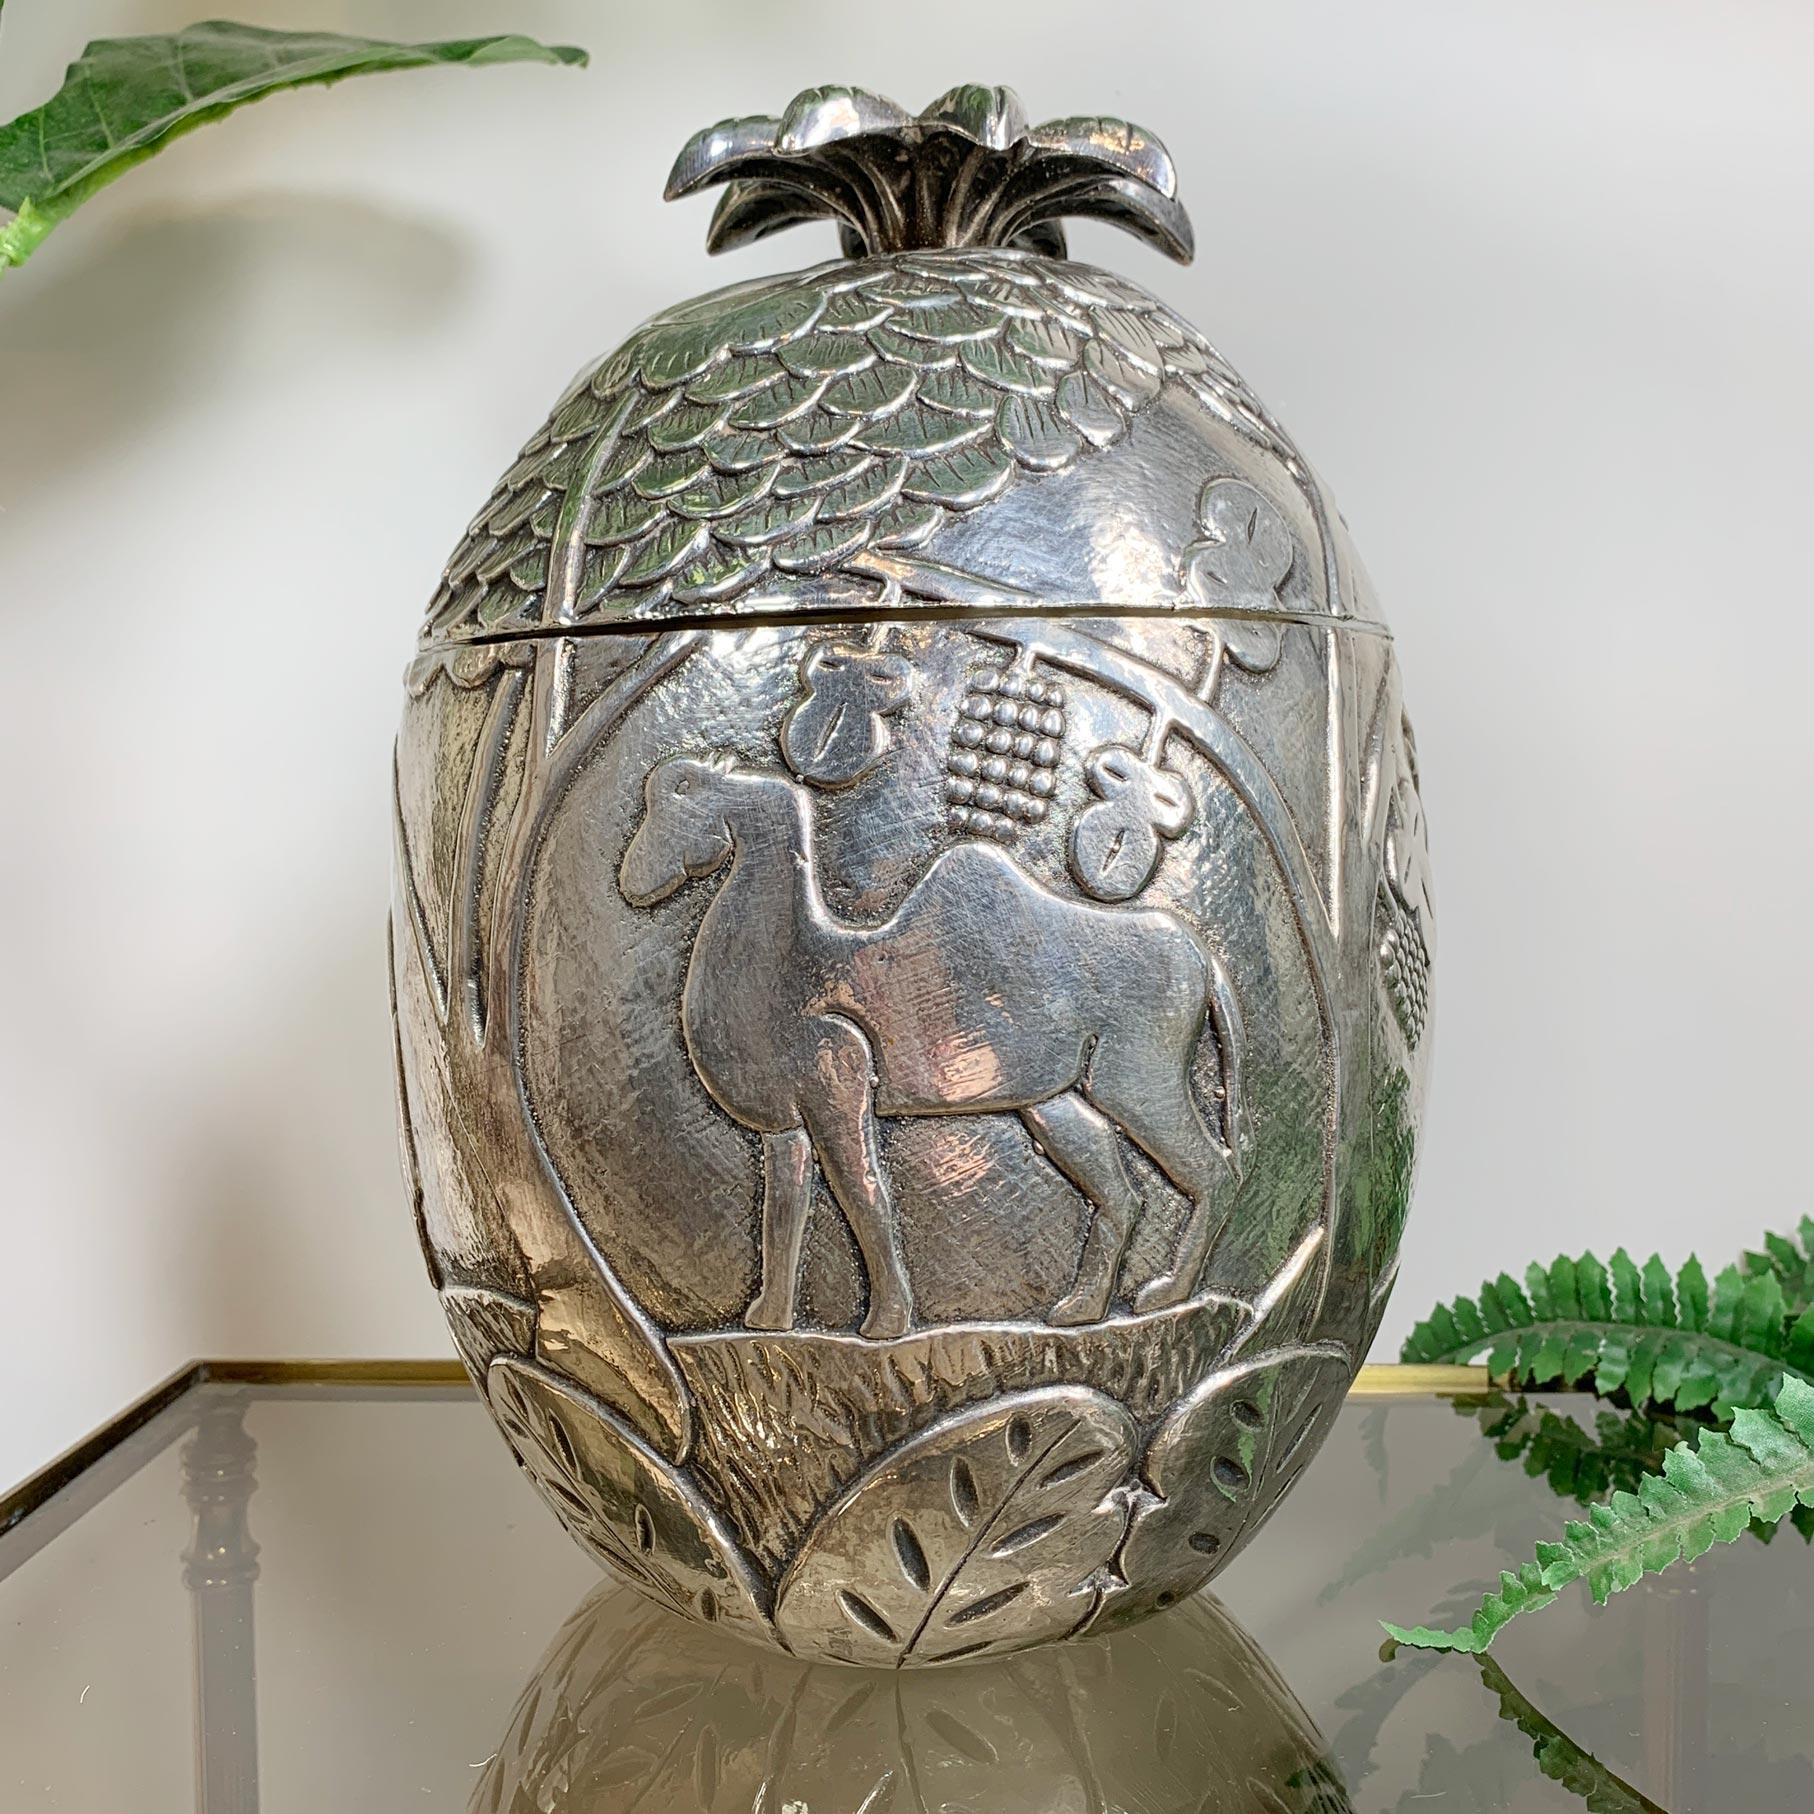 An exceptional and very rare silver-plated modernist Ice Bucket, attributed to the works of the pioneering modernist French artist Marc Chagall.

The Ice Bucket is adorned with various embossed images of Deer, Elephant, Owl and Camel, interspersed